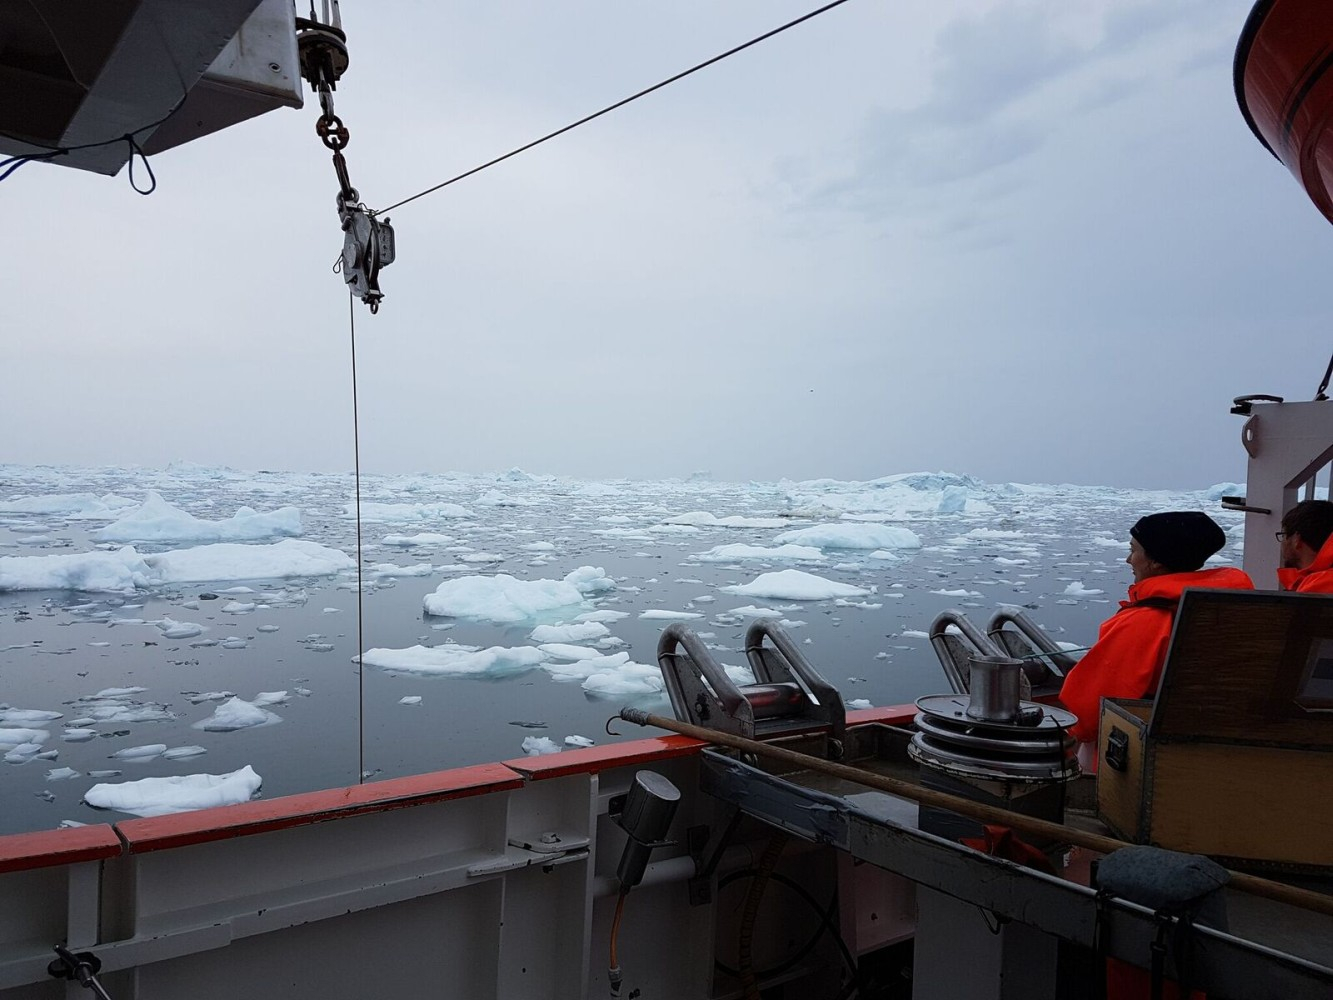 Taking samples surounded by ice bergs